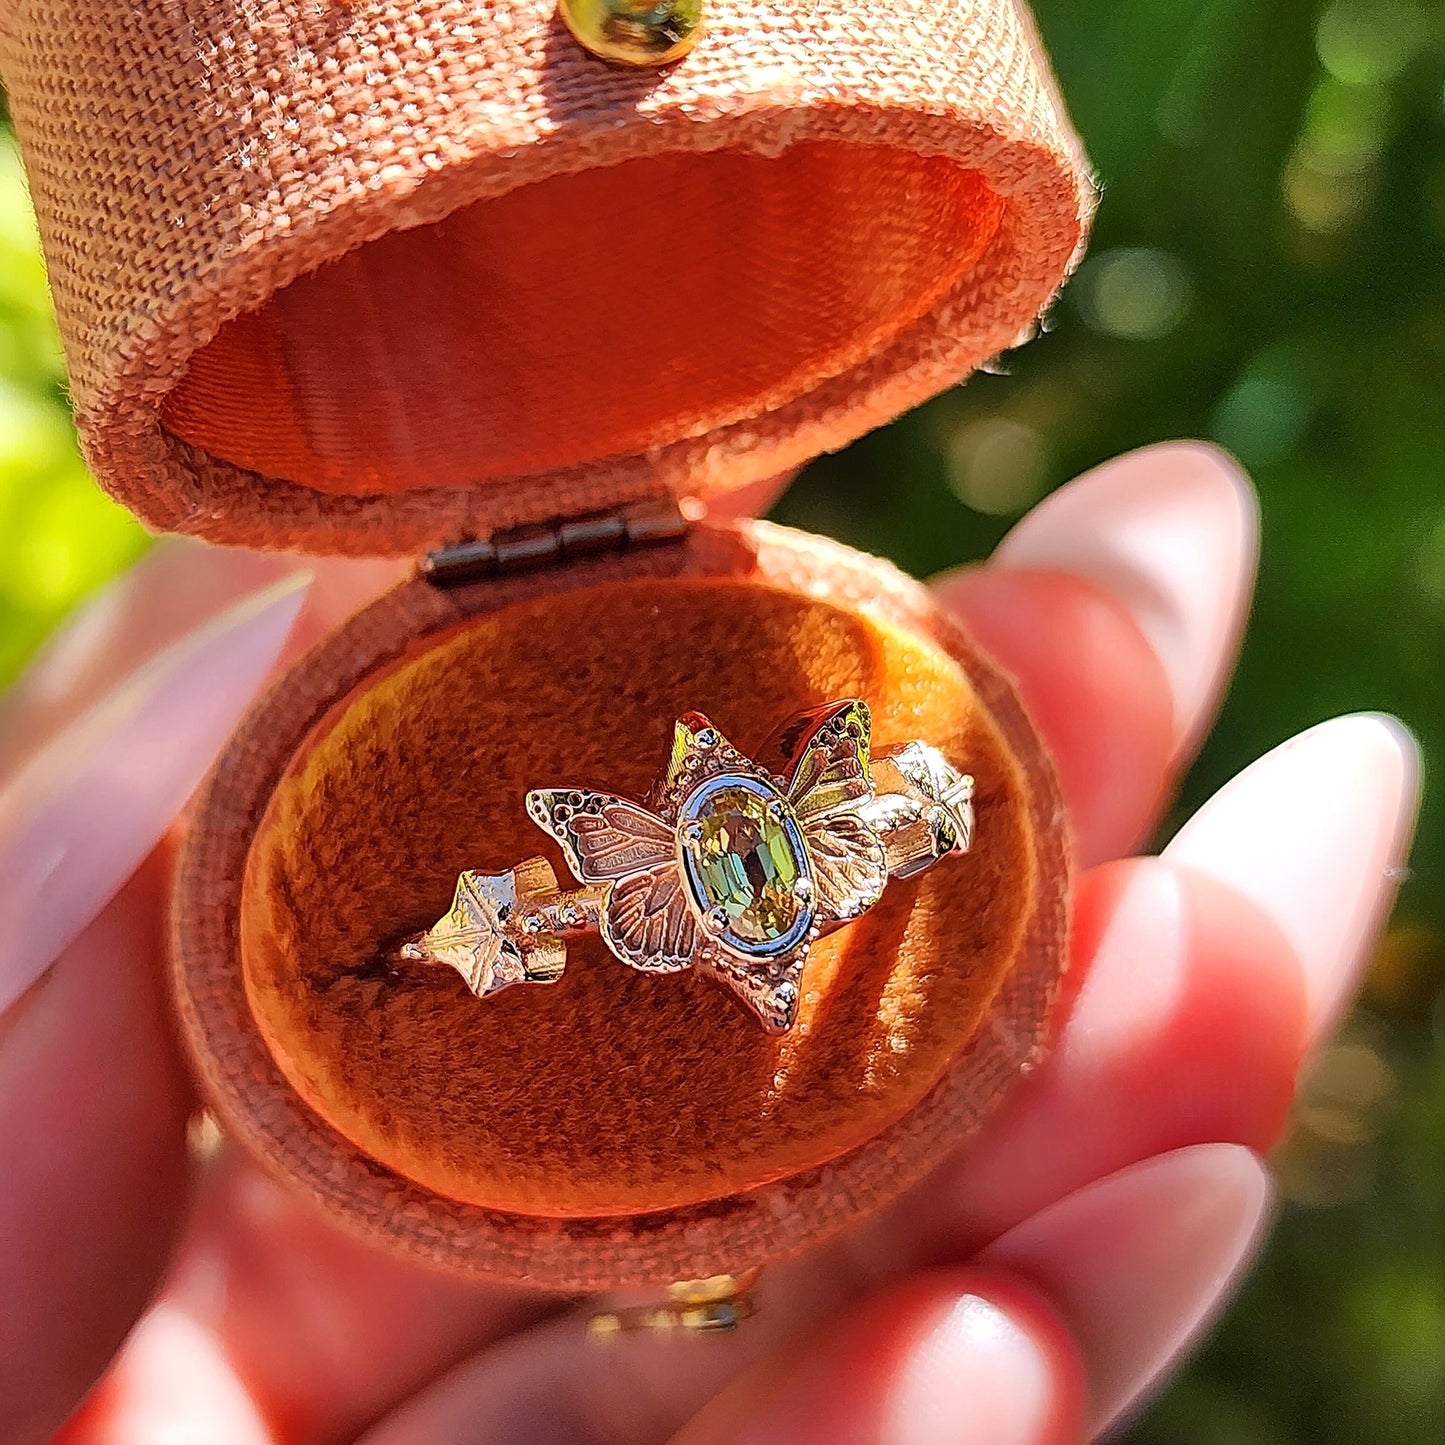 Butterfly Faerie Ring with Oval Sapphire Fairy Fantasy Engagement with Ivy Leaf - Pick your Gemstone Fairytale 14k Gold